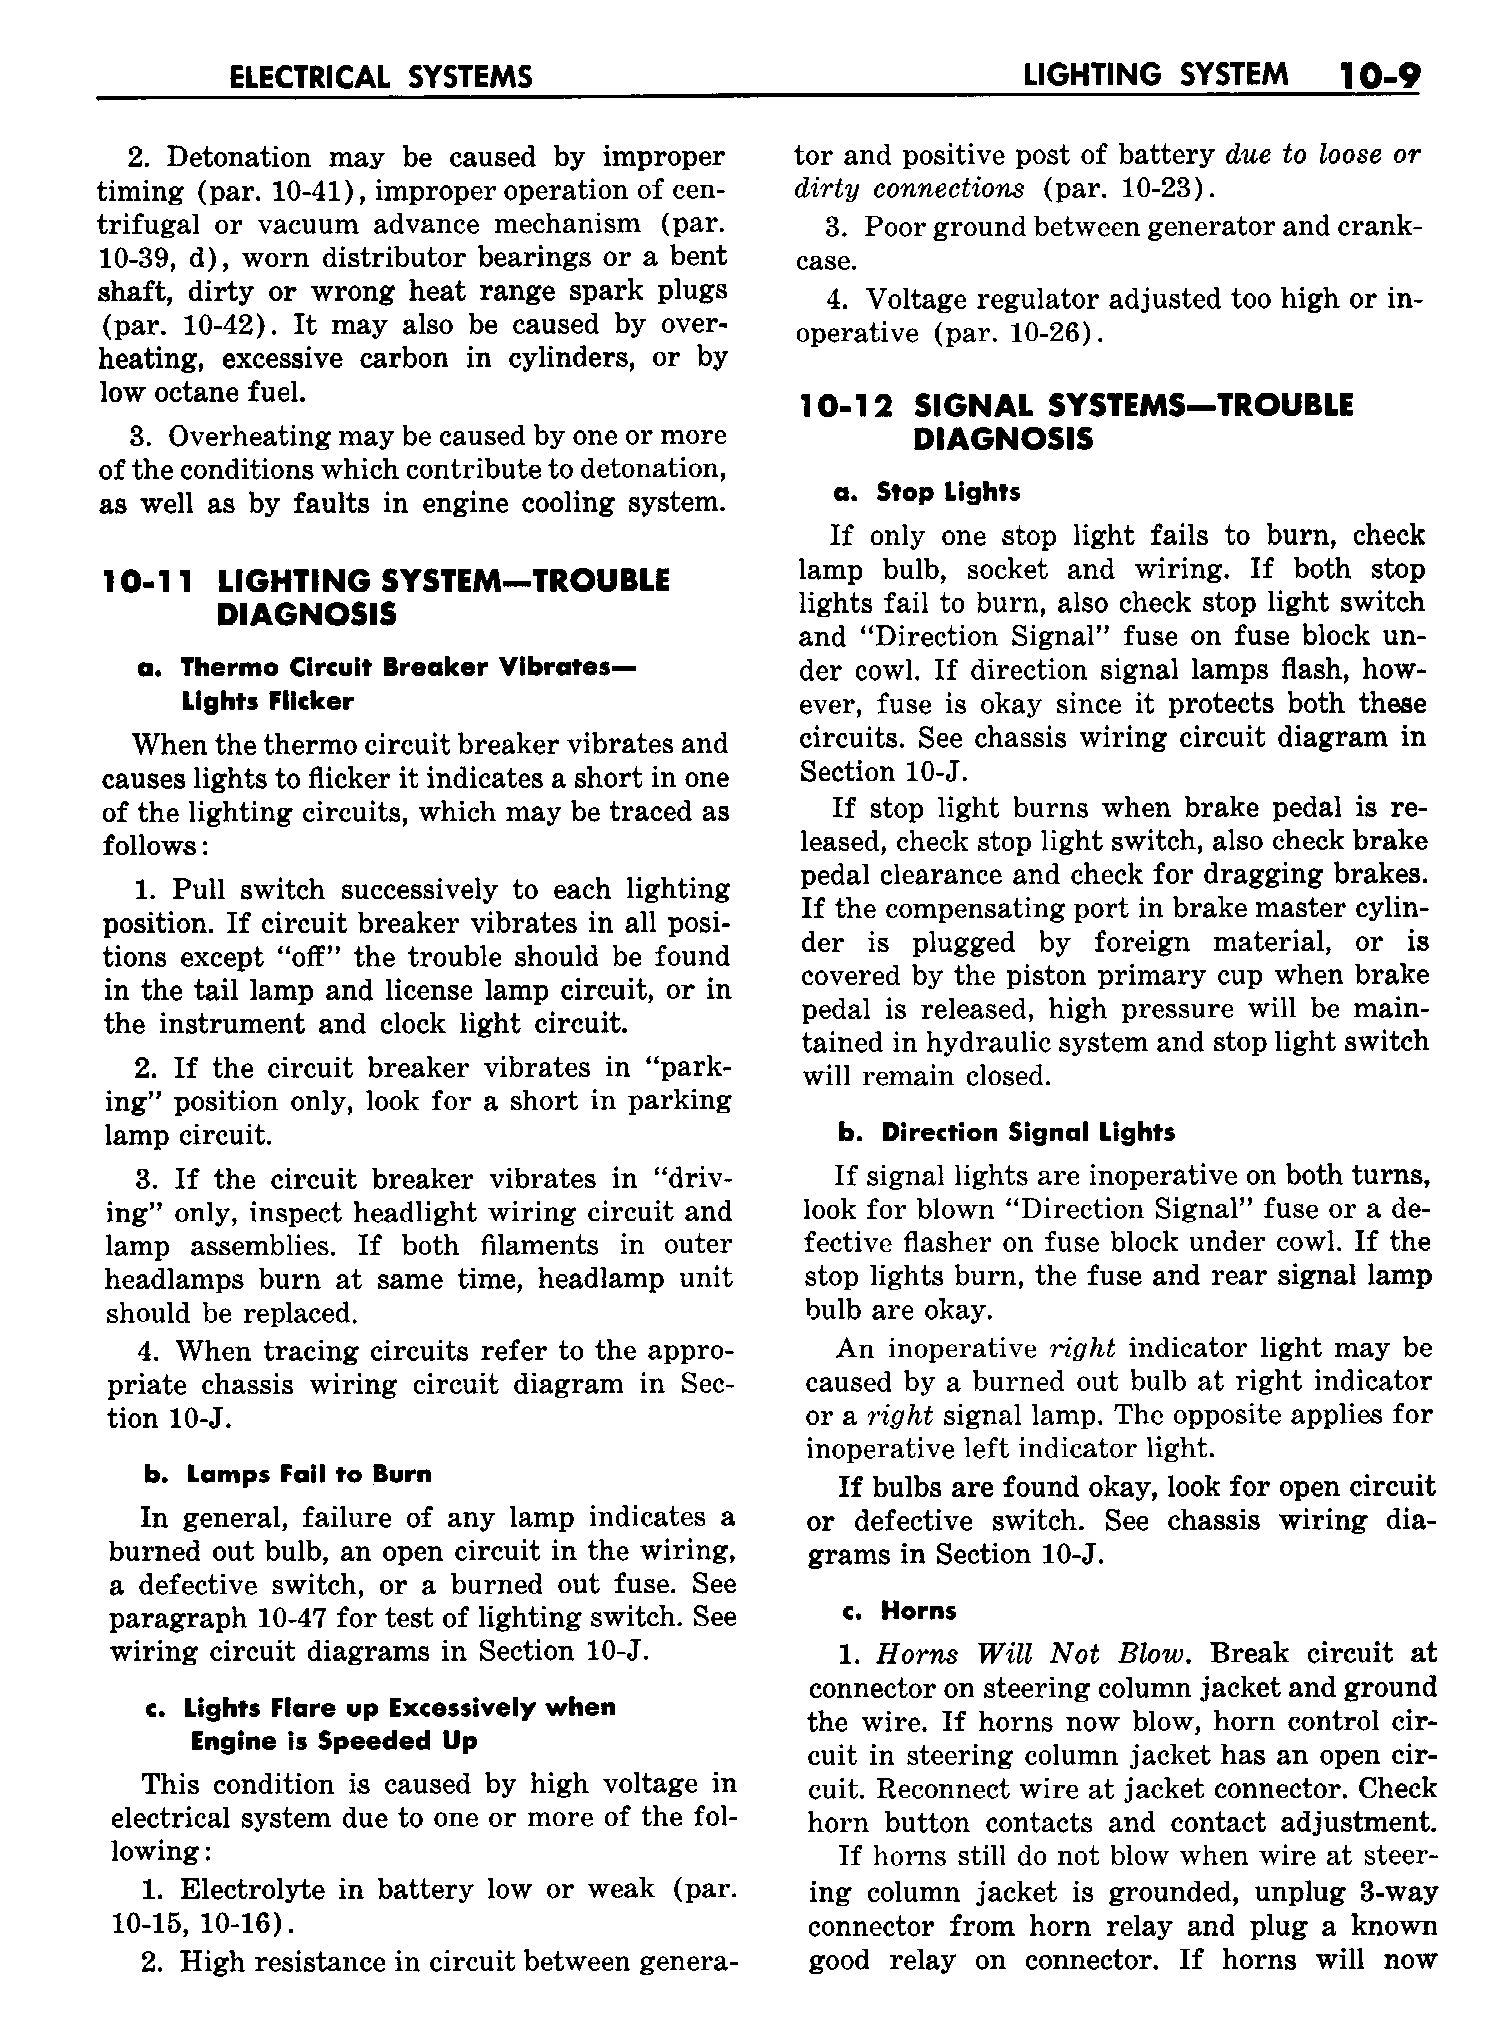 n_11 1958 Buick Shop Manual - Electrical Systems_9.jpg